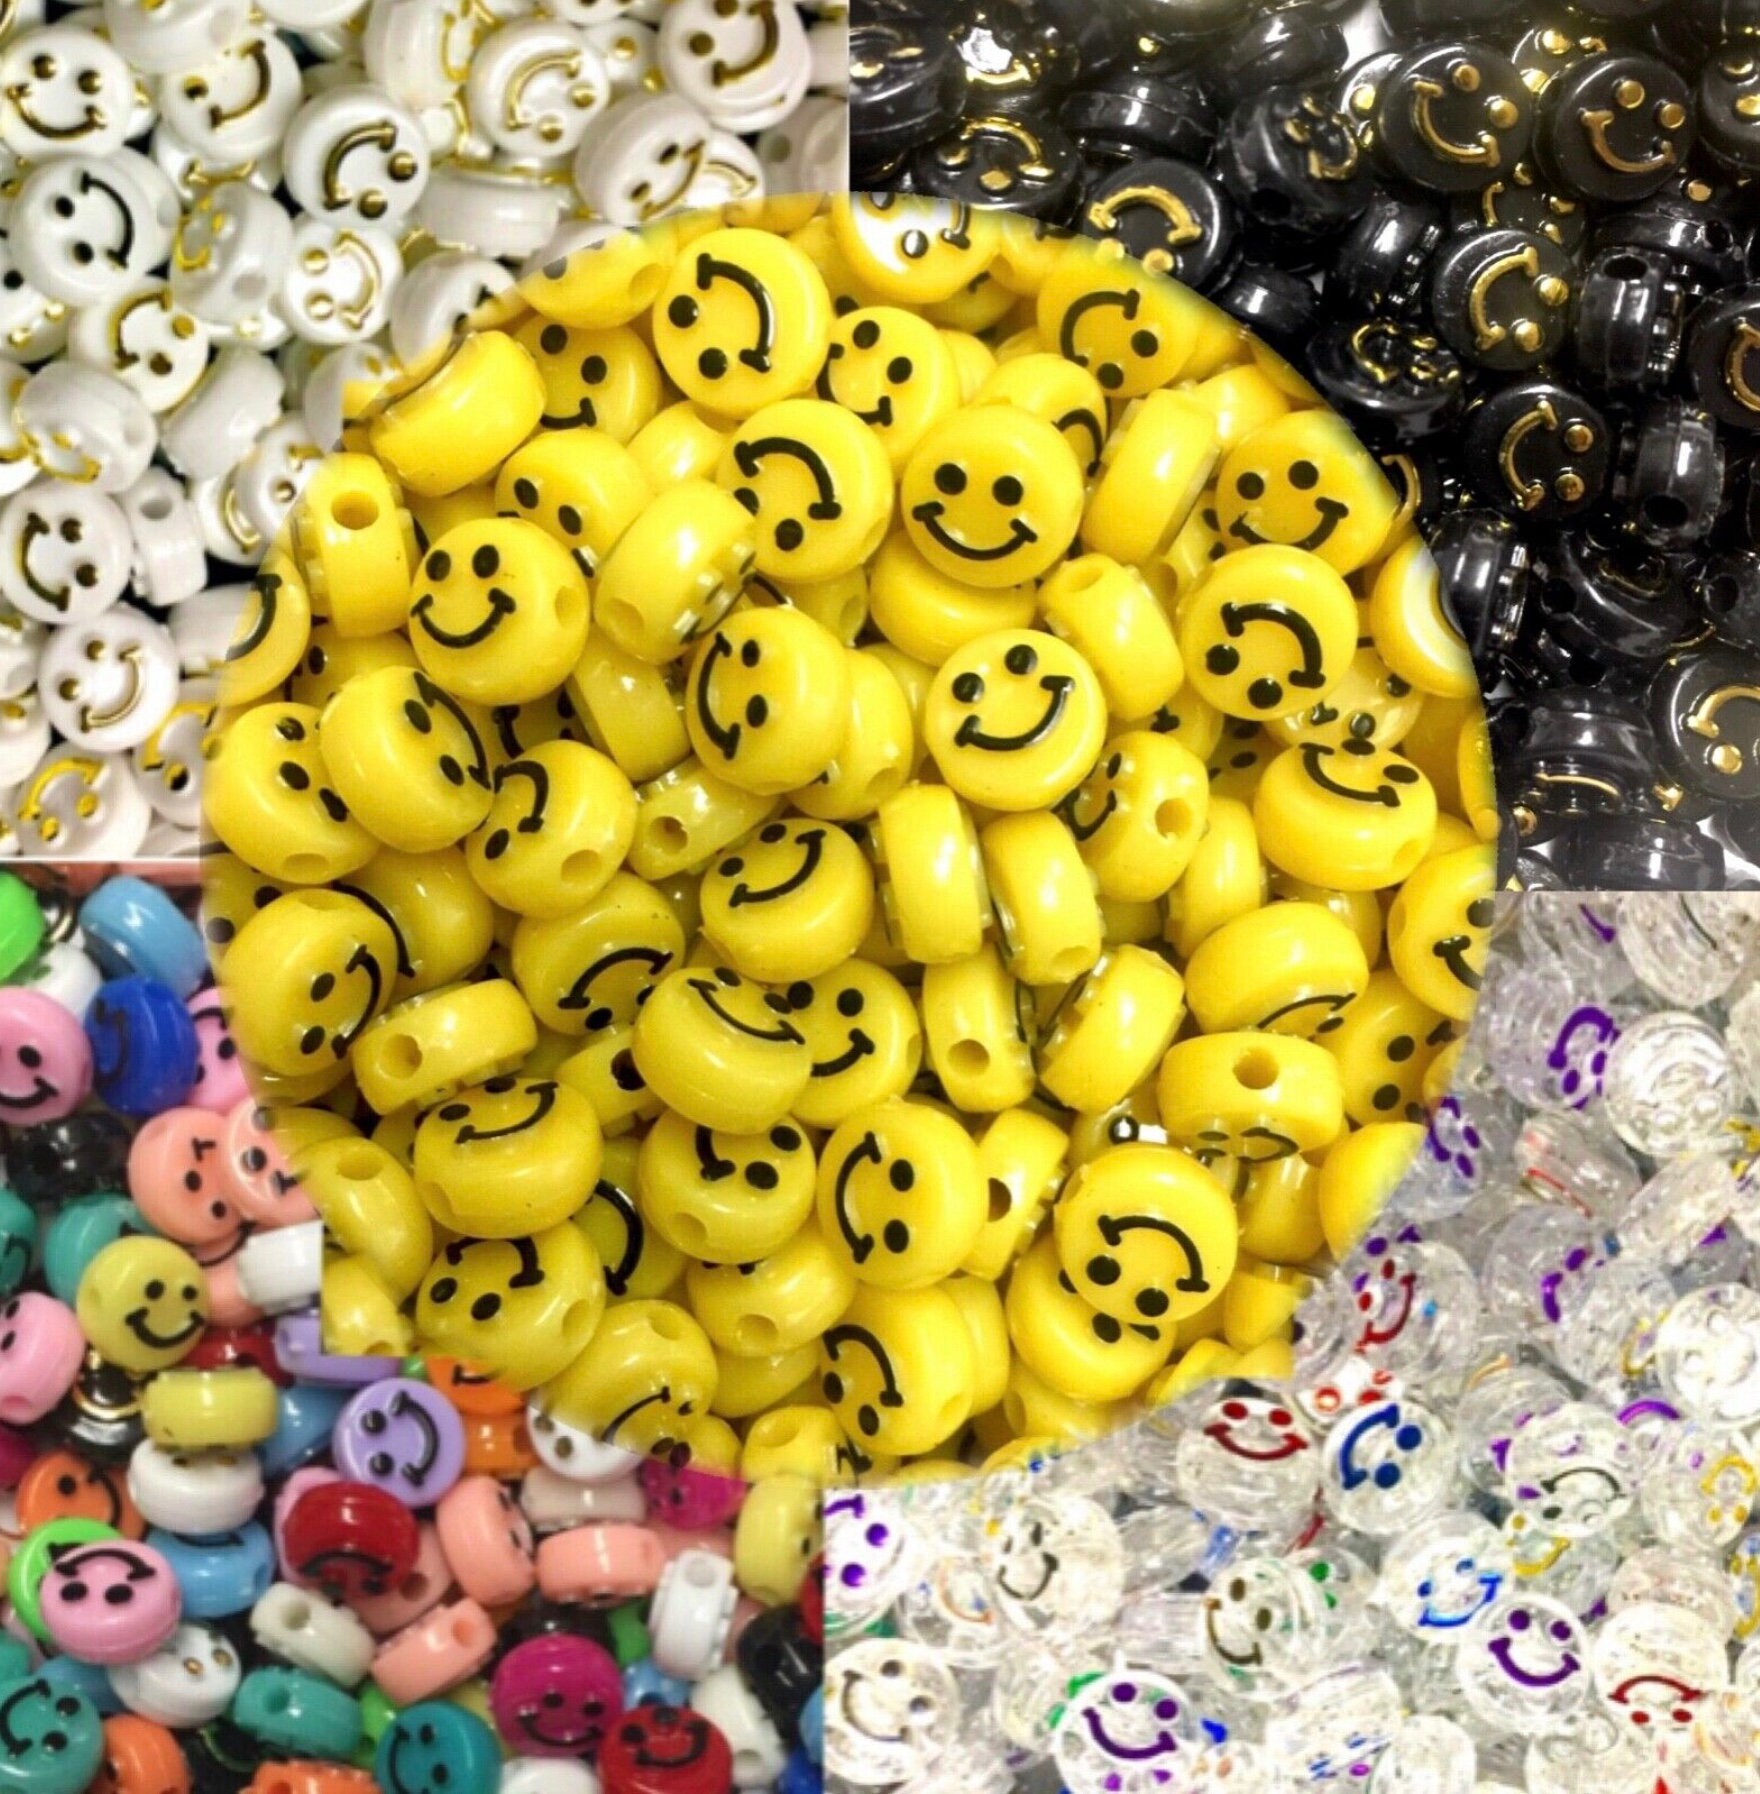 7mm Acrylic Smiley Face Beads, Pink Smiley Face Beads, White